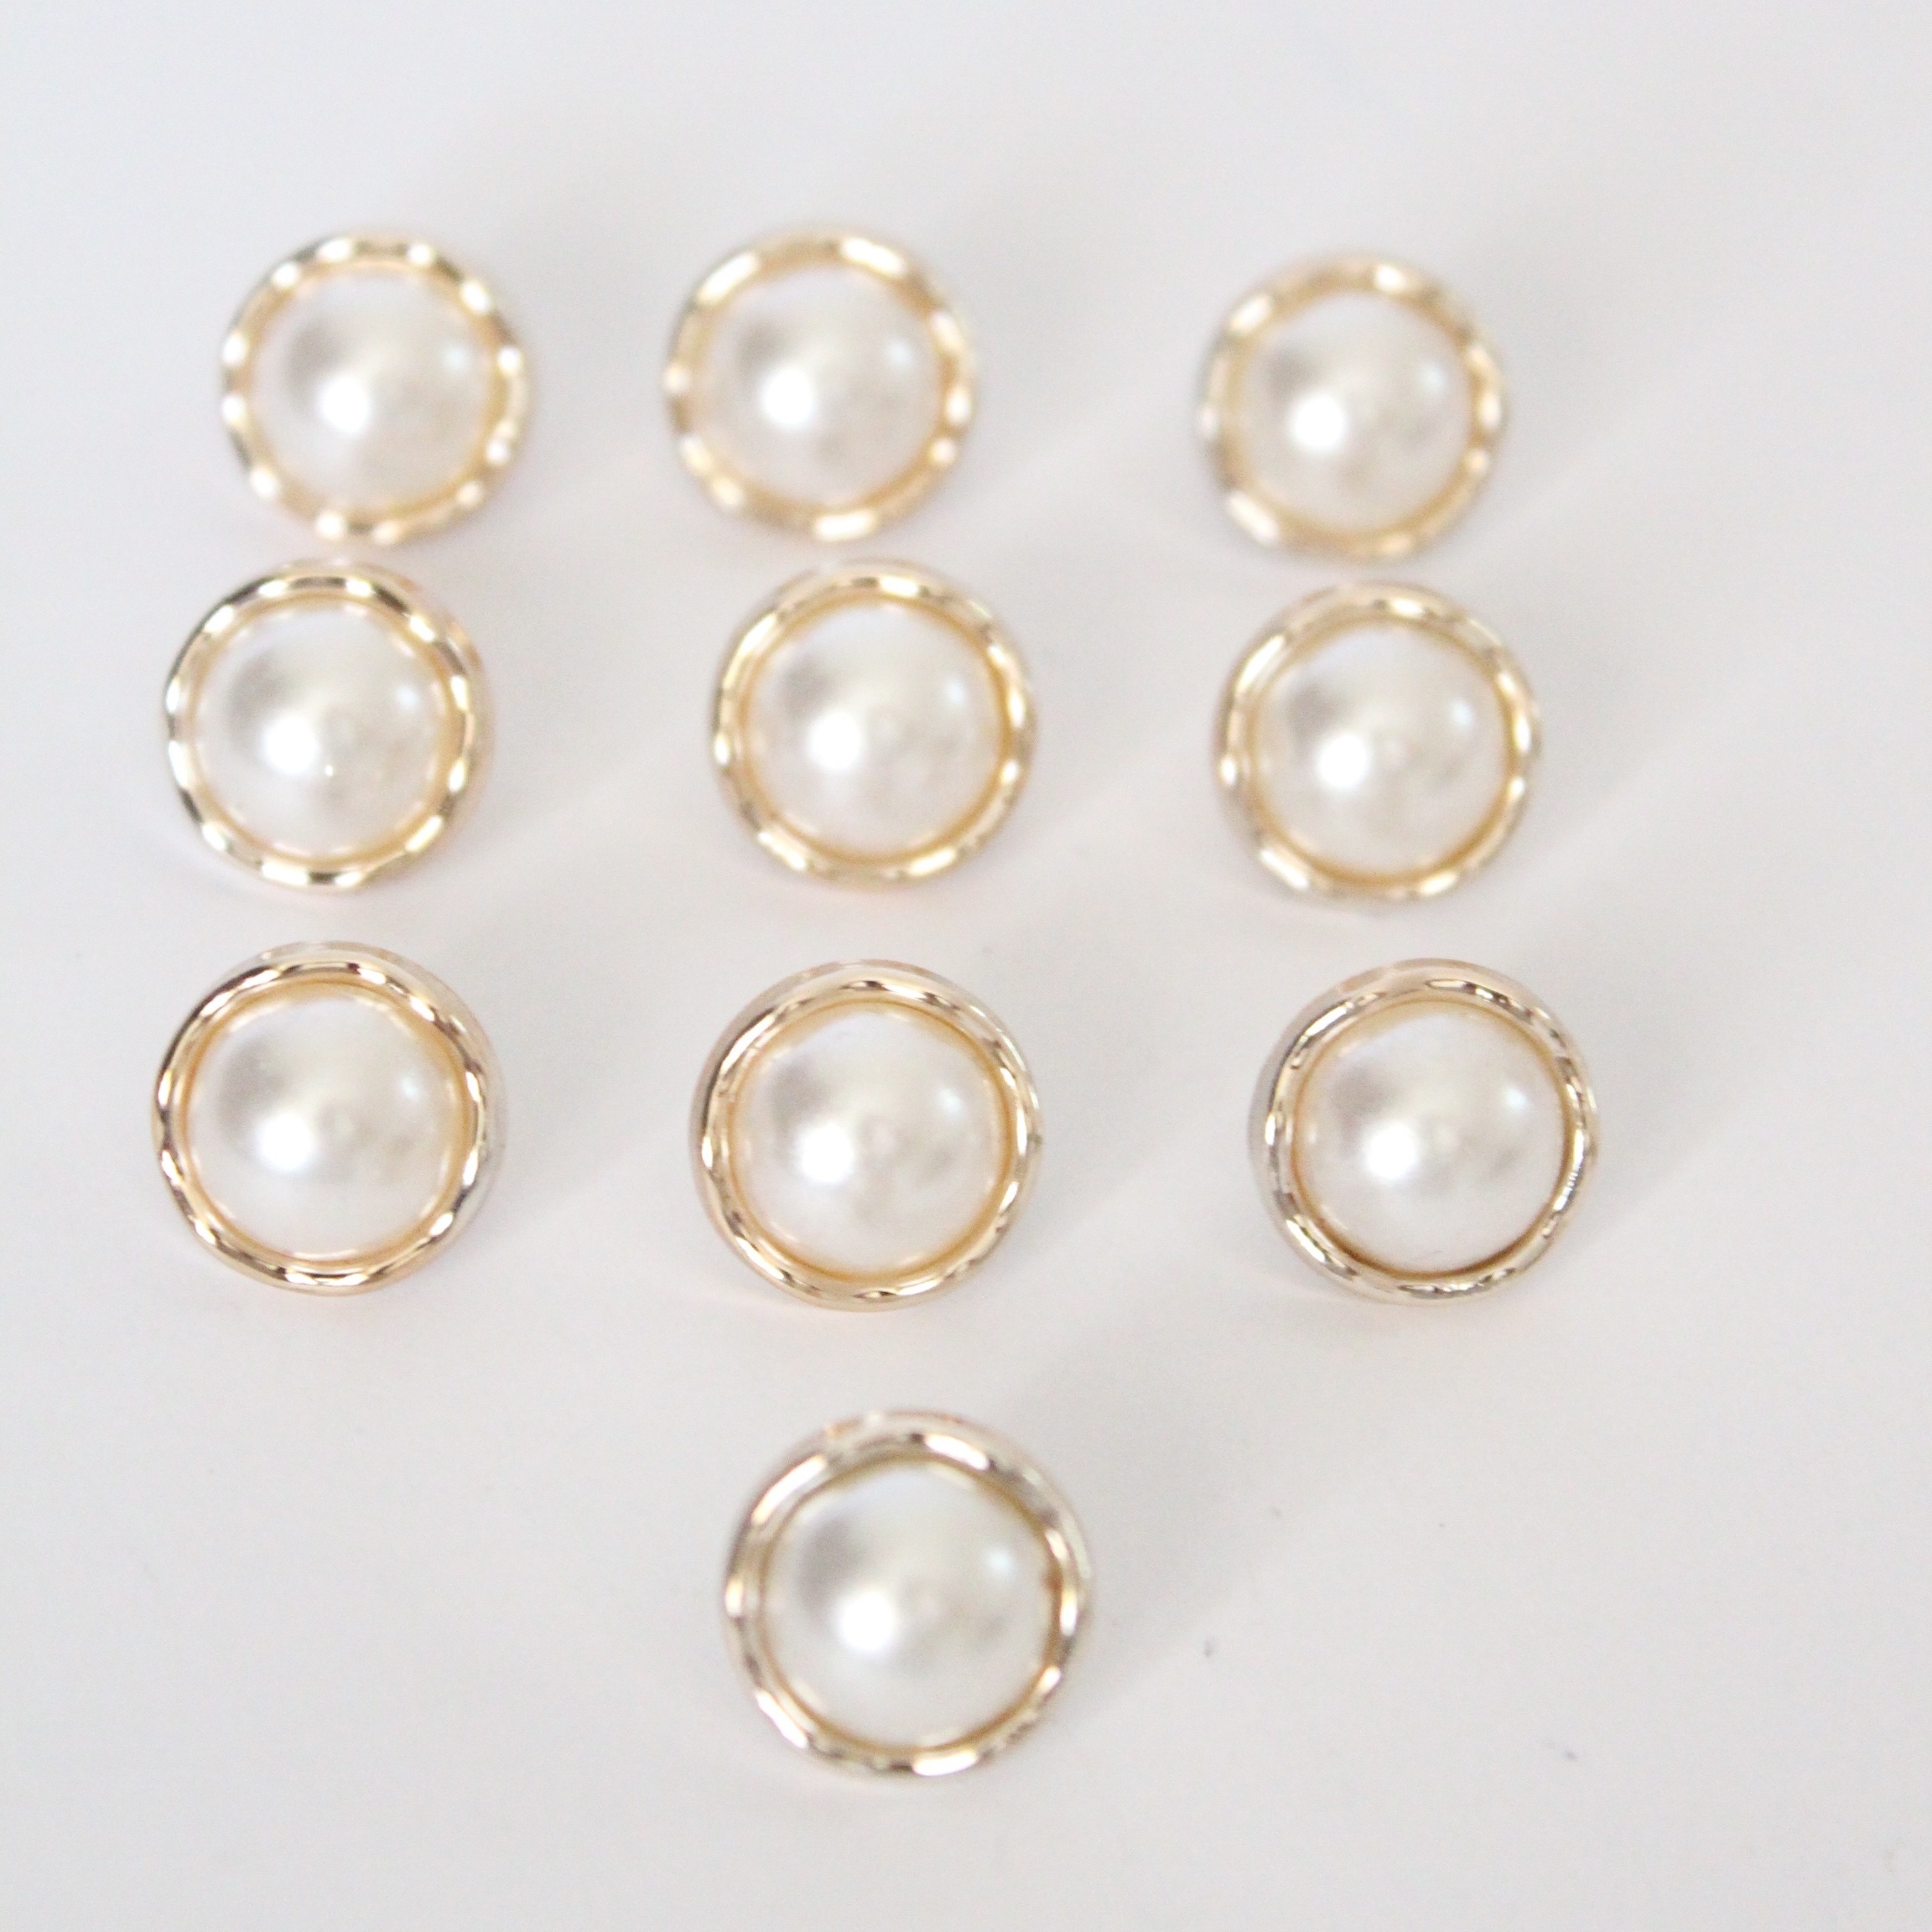 8PCS pearl flat back replacement buttons for coats pearl buttons for sewing